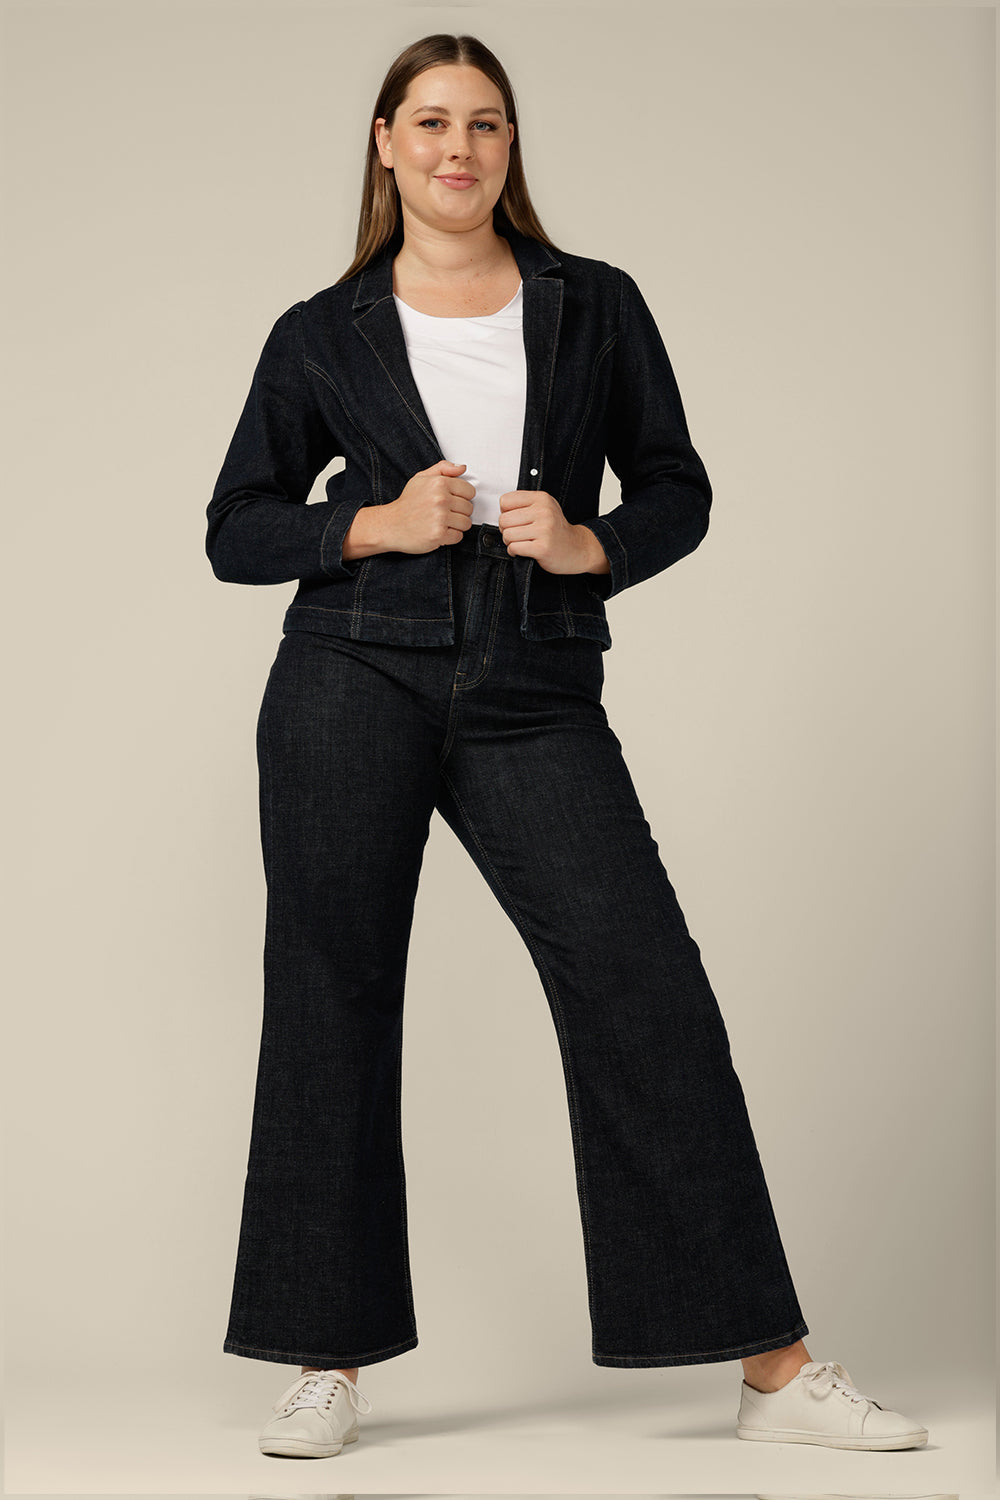 High-waisted, flared leg jeans in midnight denim, size 12. Ethically and sustainably made by Australian and New Zealand women's clothing brand, L&F, these well-fitting, comfortable jeans are worn with a denim jacket and white bamboo jersey T-shirt.